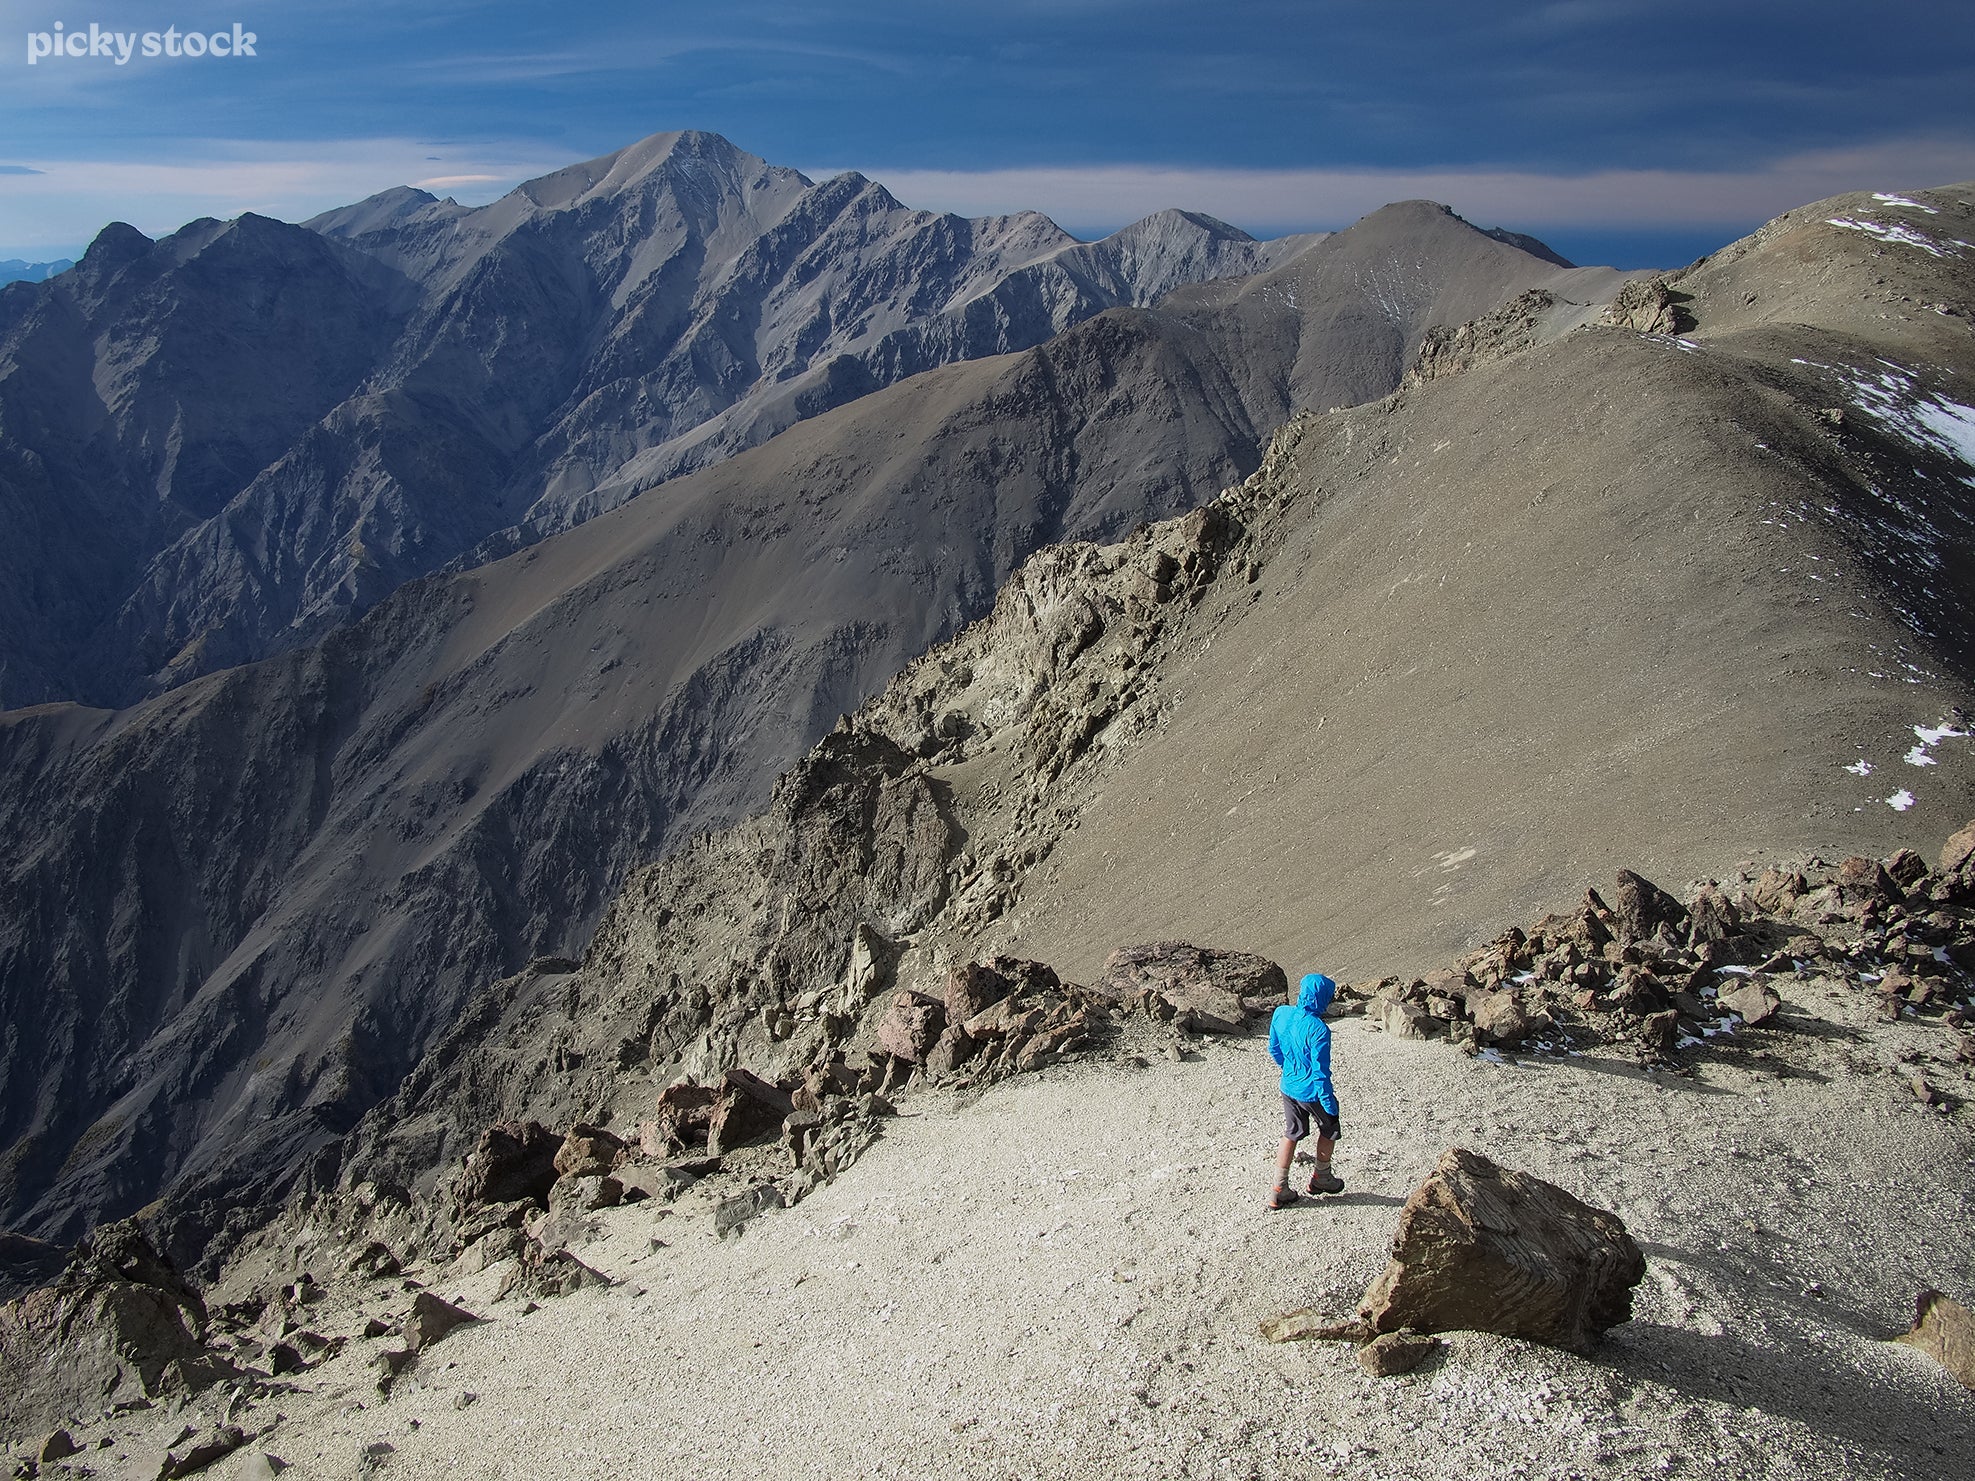 The landscape of a man in a bright blue jacket walks down a path descending from a rocky mountain side. A dark blue sky looms high above the trail.